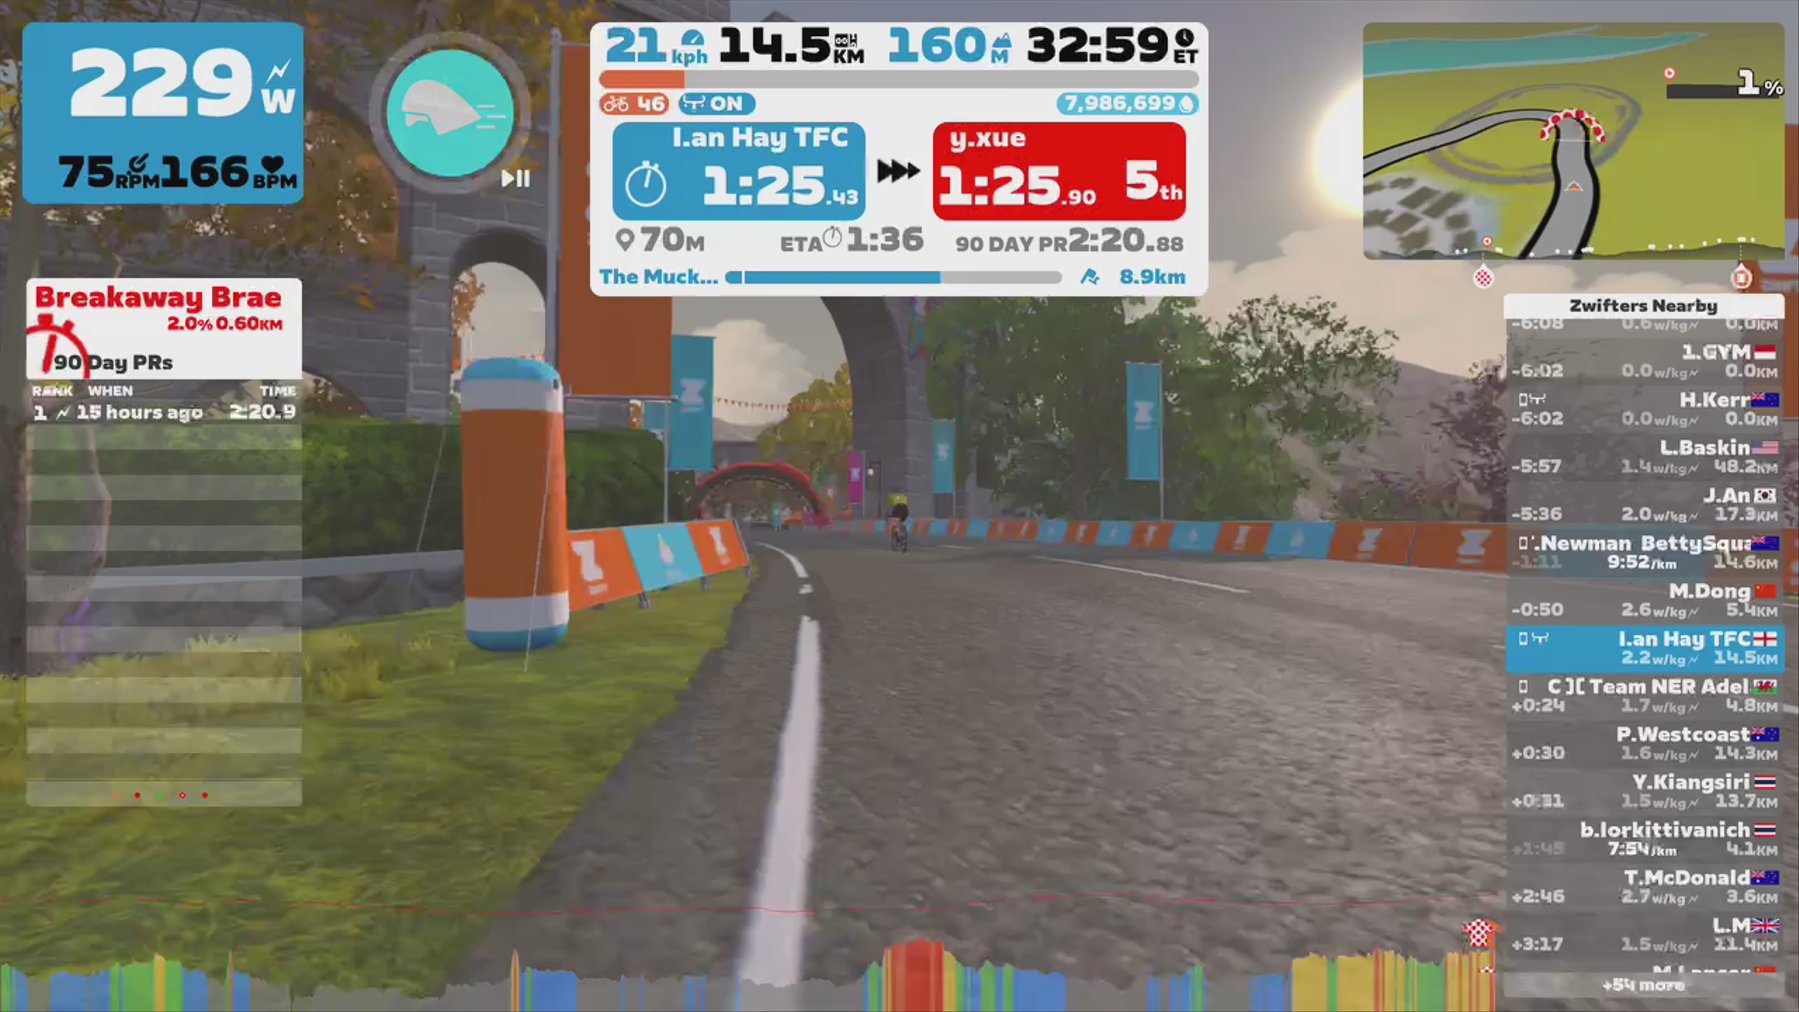 Zwift - The Muckle Yin in Scotland